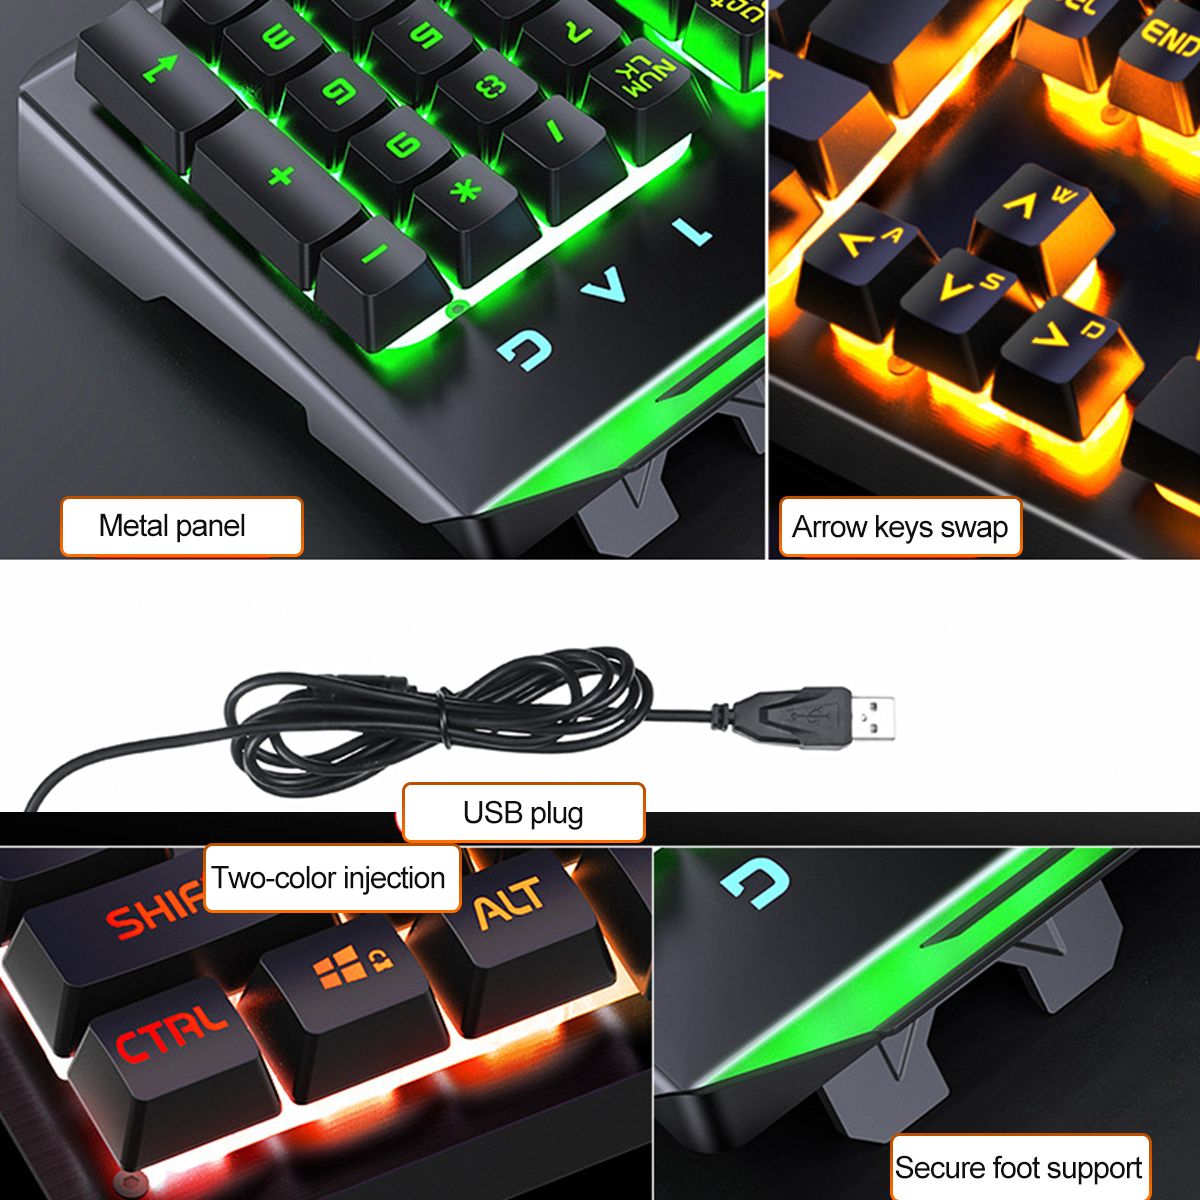 3-In-1-USB-Wired-3200DPI-Mouse-Colorful-Headset-Rainbow-Backlight-Mechanical-Keyboard-Set-with-Mouse-1614269